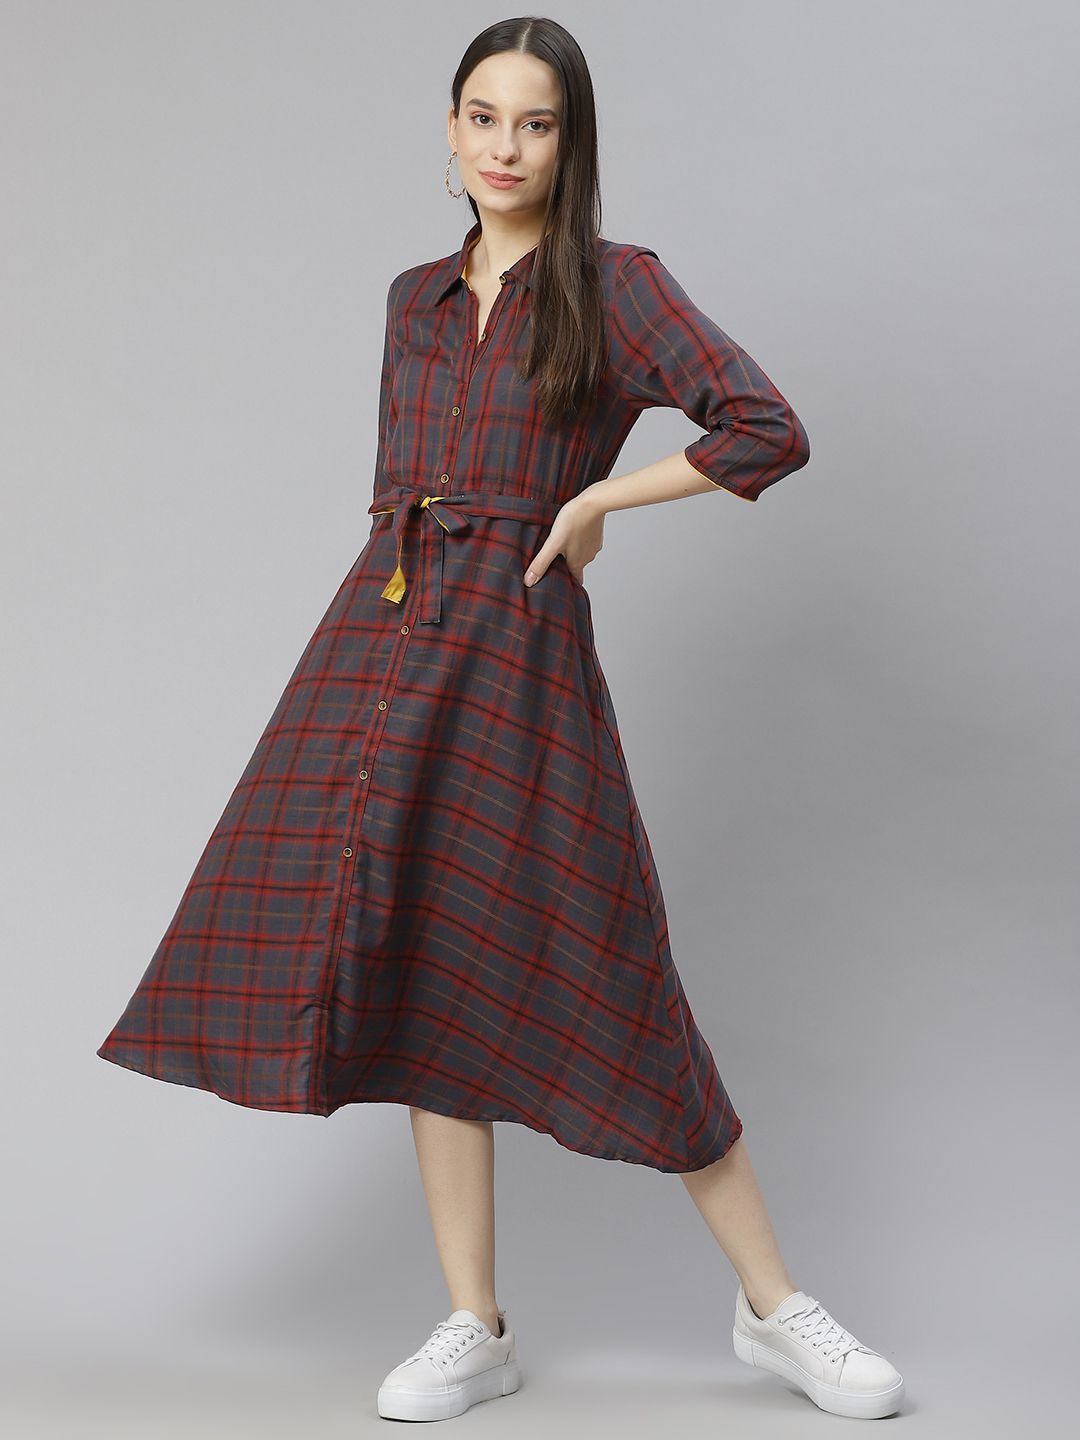 AURELIA Navy Blue & Maroon Checked Shirt Cotton Dress with Belt Price in India